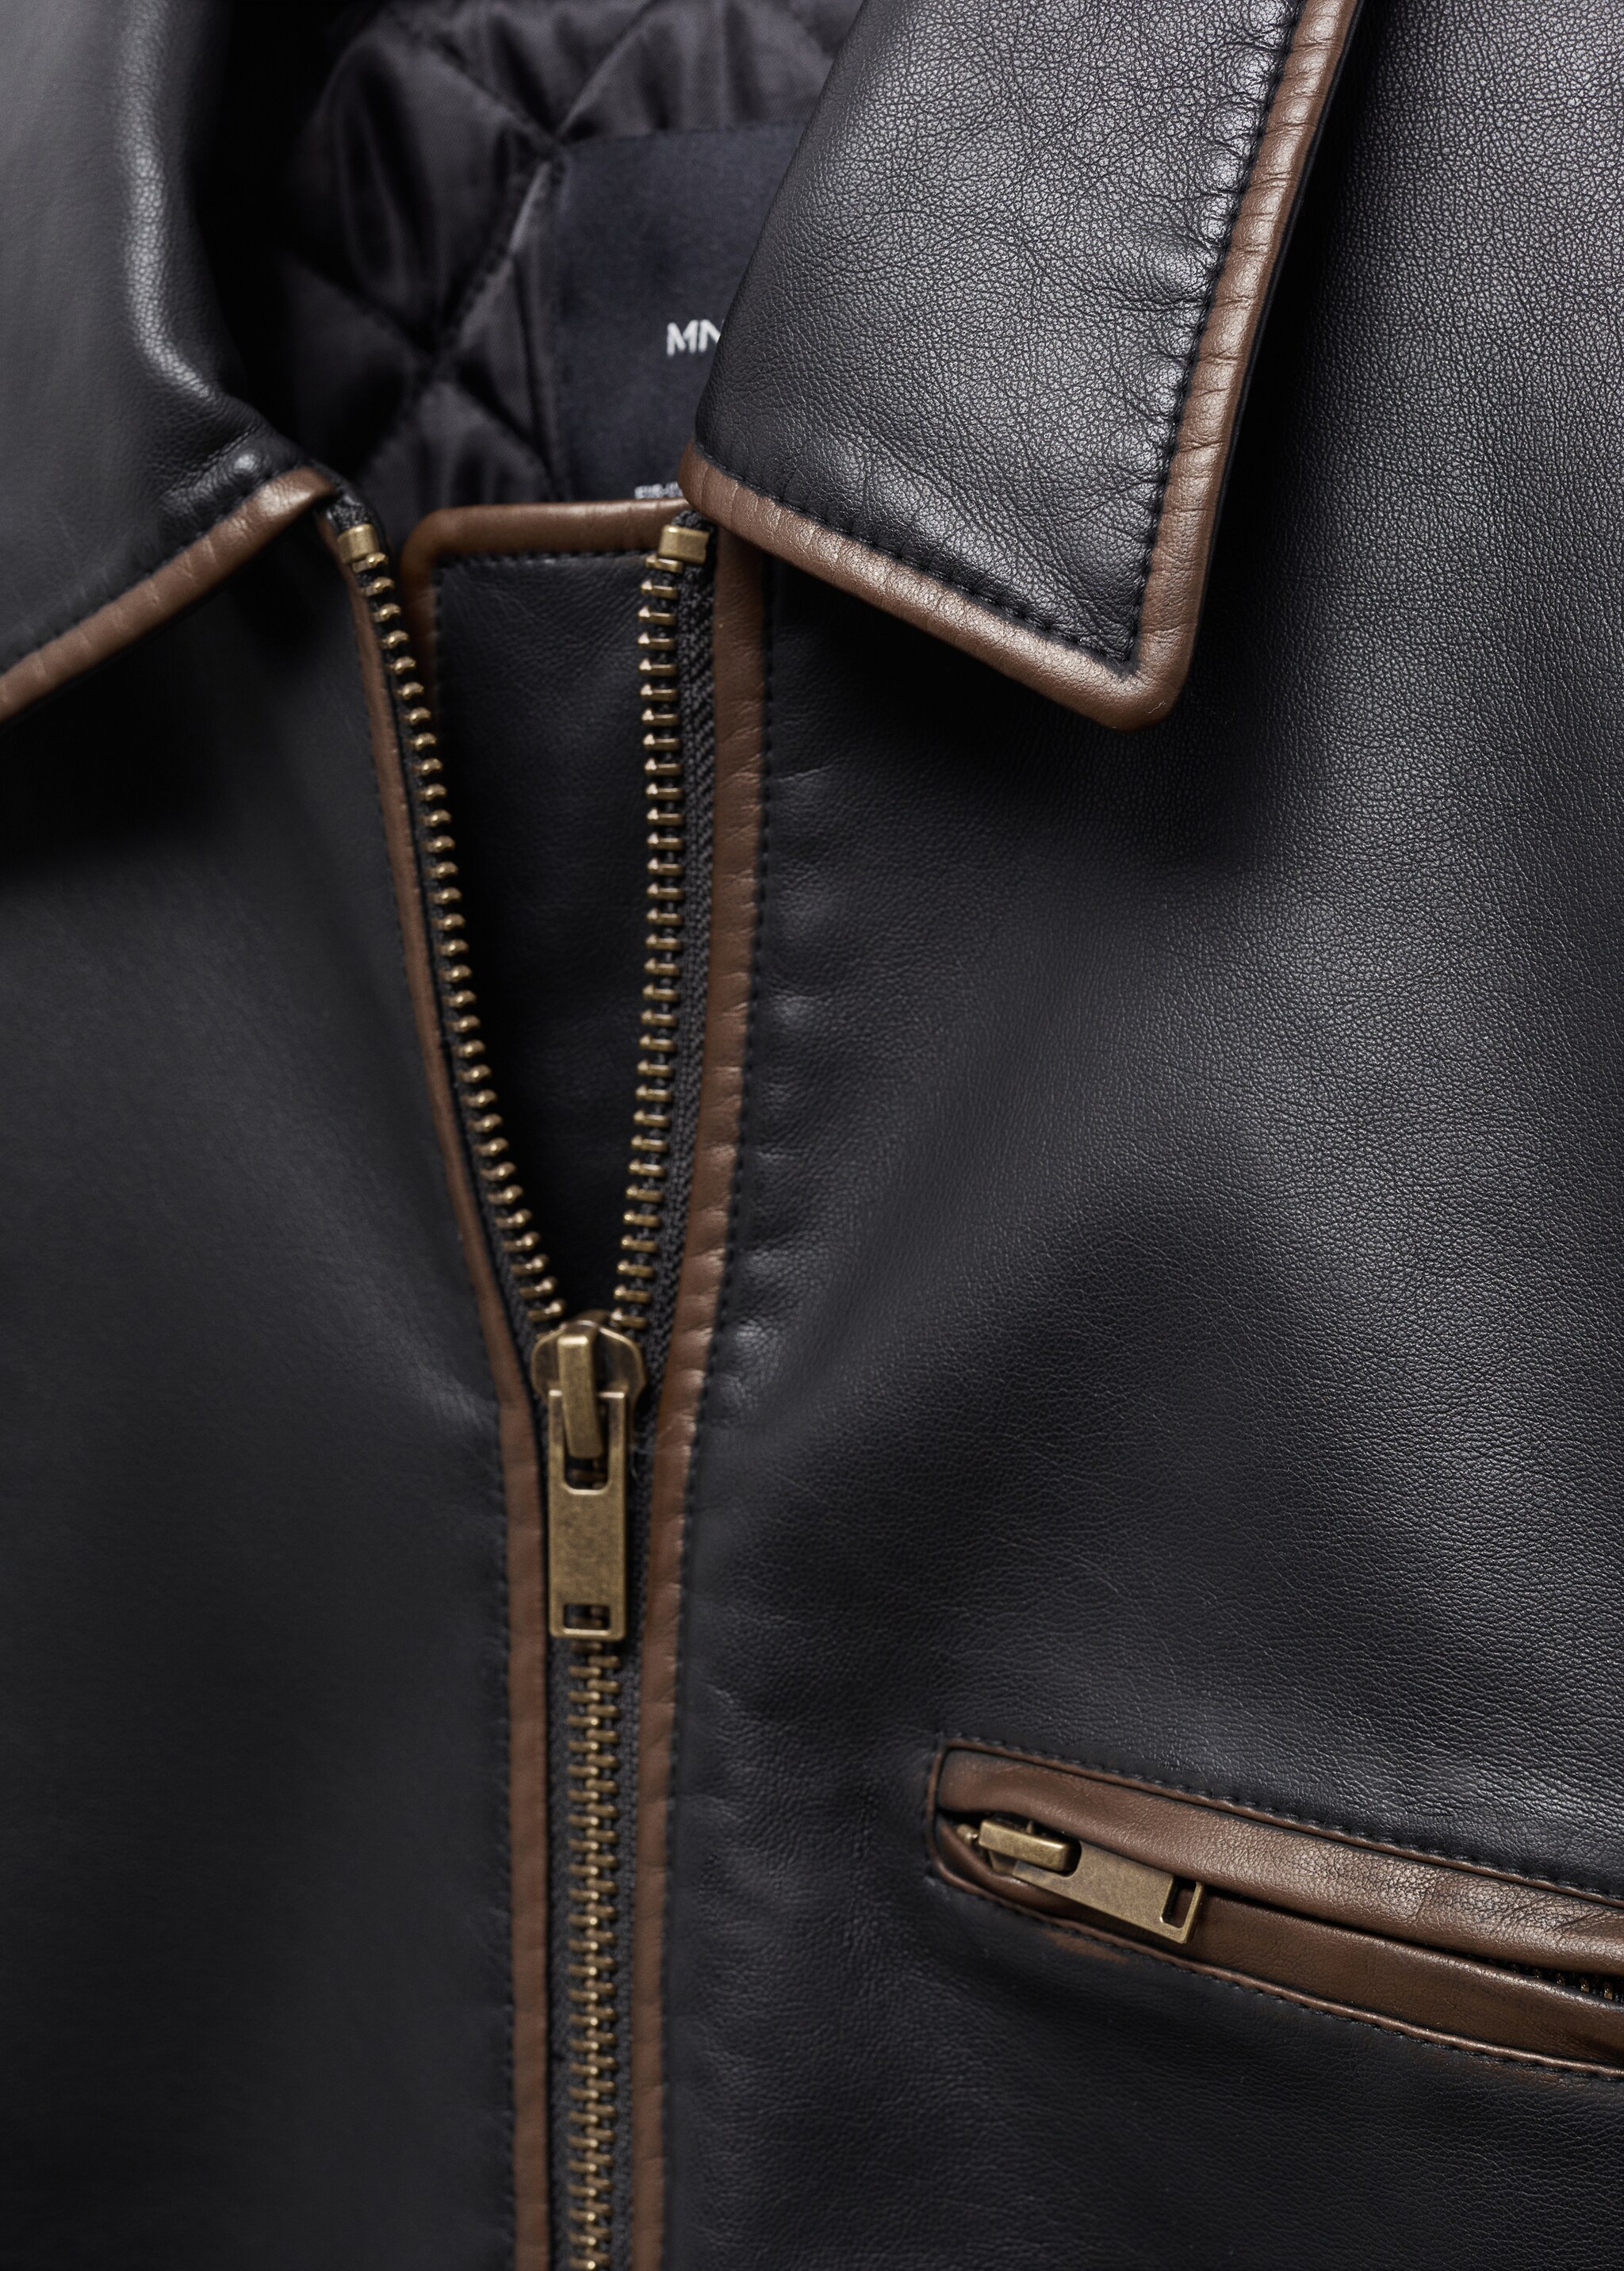 Worn leather effect jacket - Details of the article 8